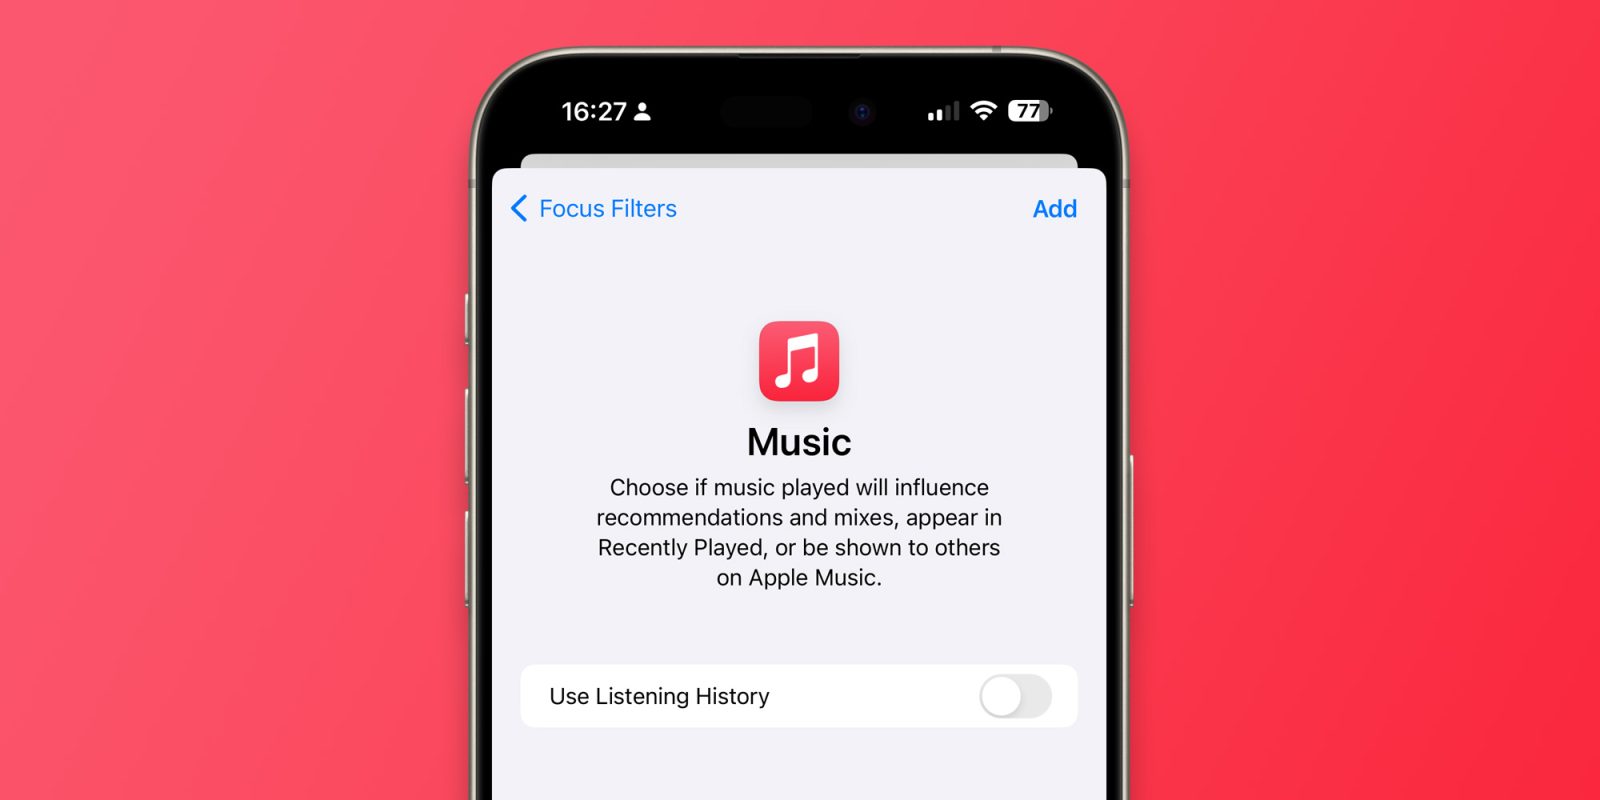 iOS 17.2 lets users disable Apple Music Listening History when a Focus Mode is on